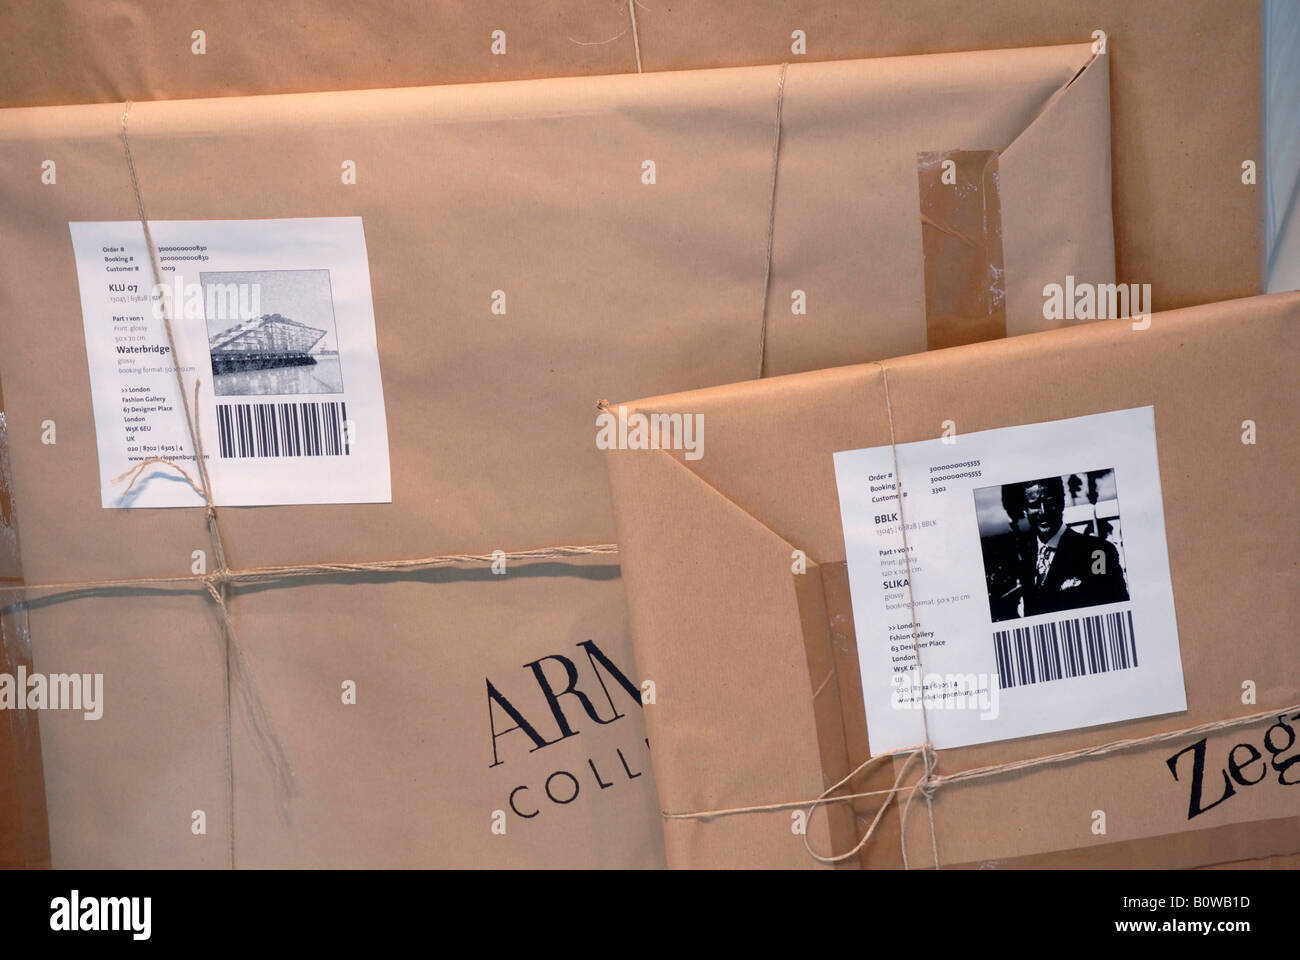 Packages, shop window display Stock Photo